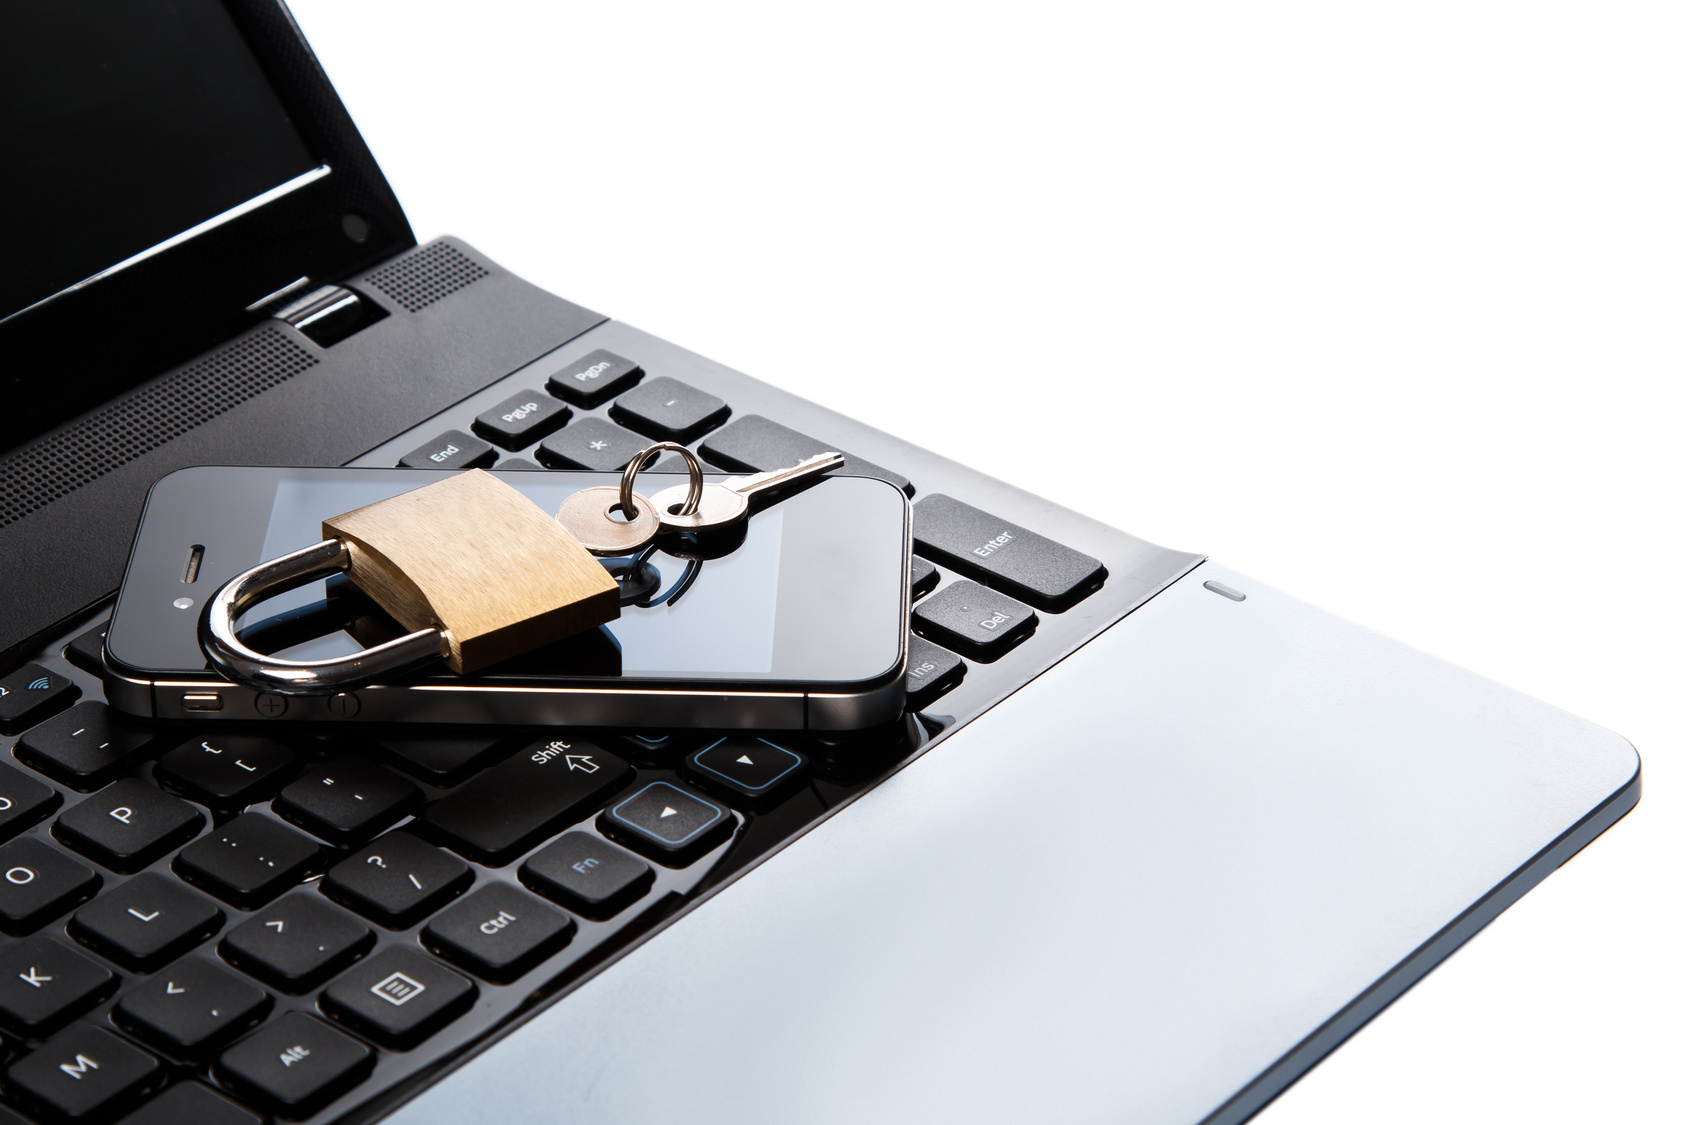 Smartphone And Padlock Is Lying On A Laptop Keyboard